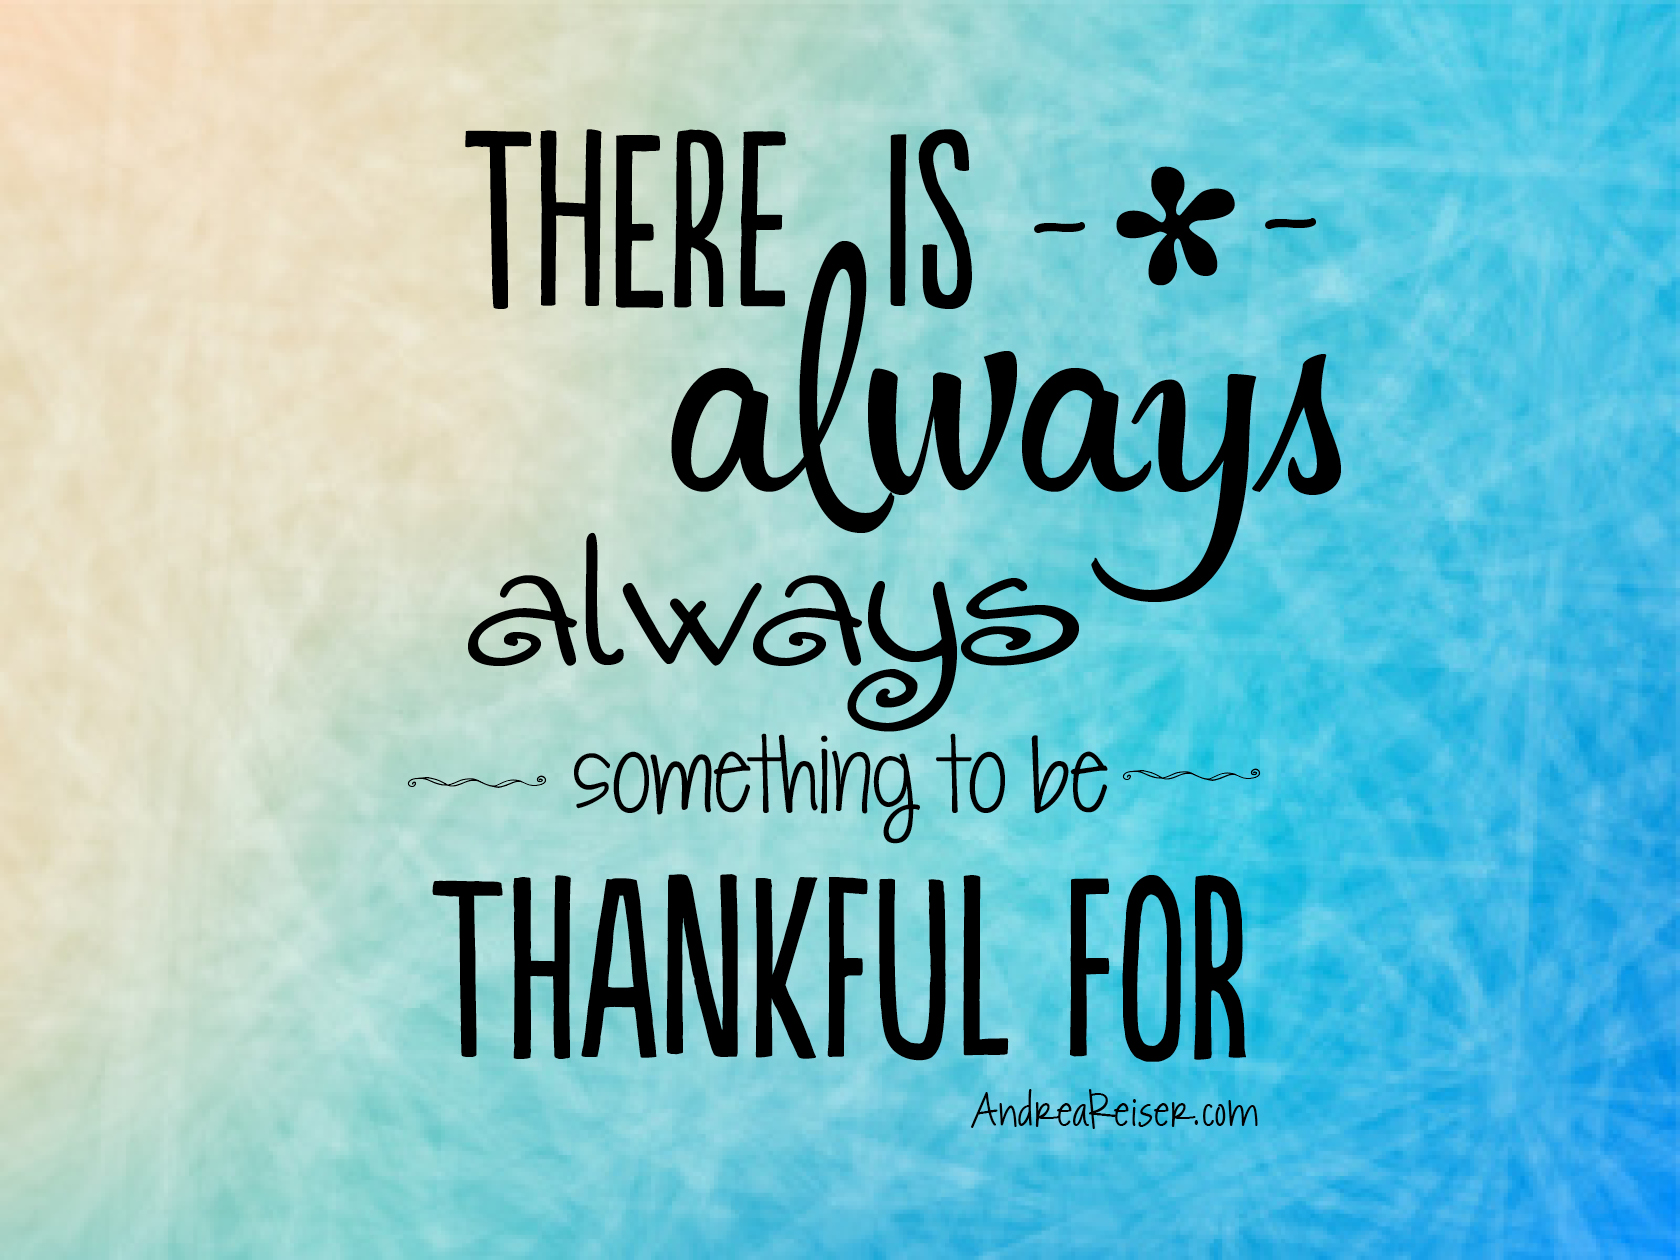 There-is-always-something-to-be-thankful-for